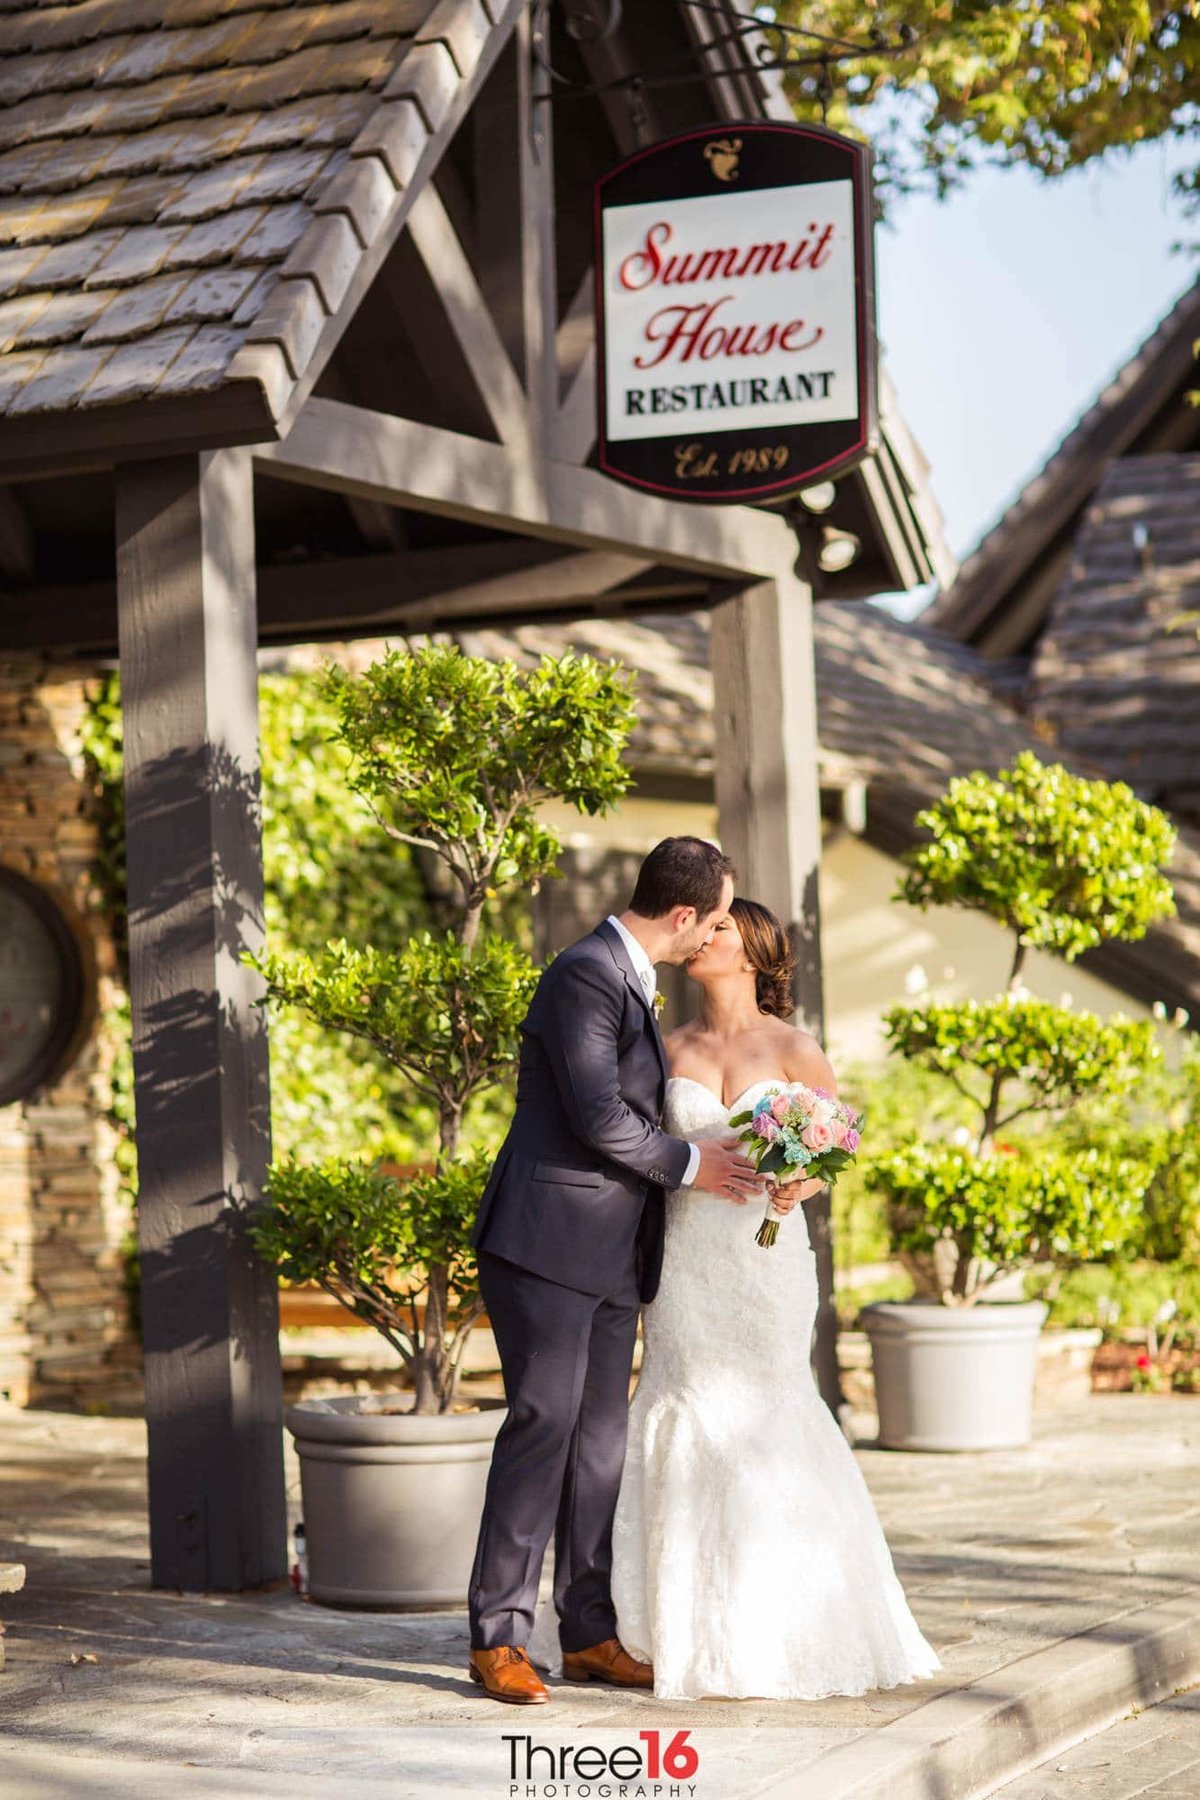 Bride and Groom share a kiss in front of the Summit House Restaurant